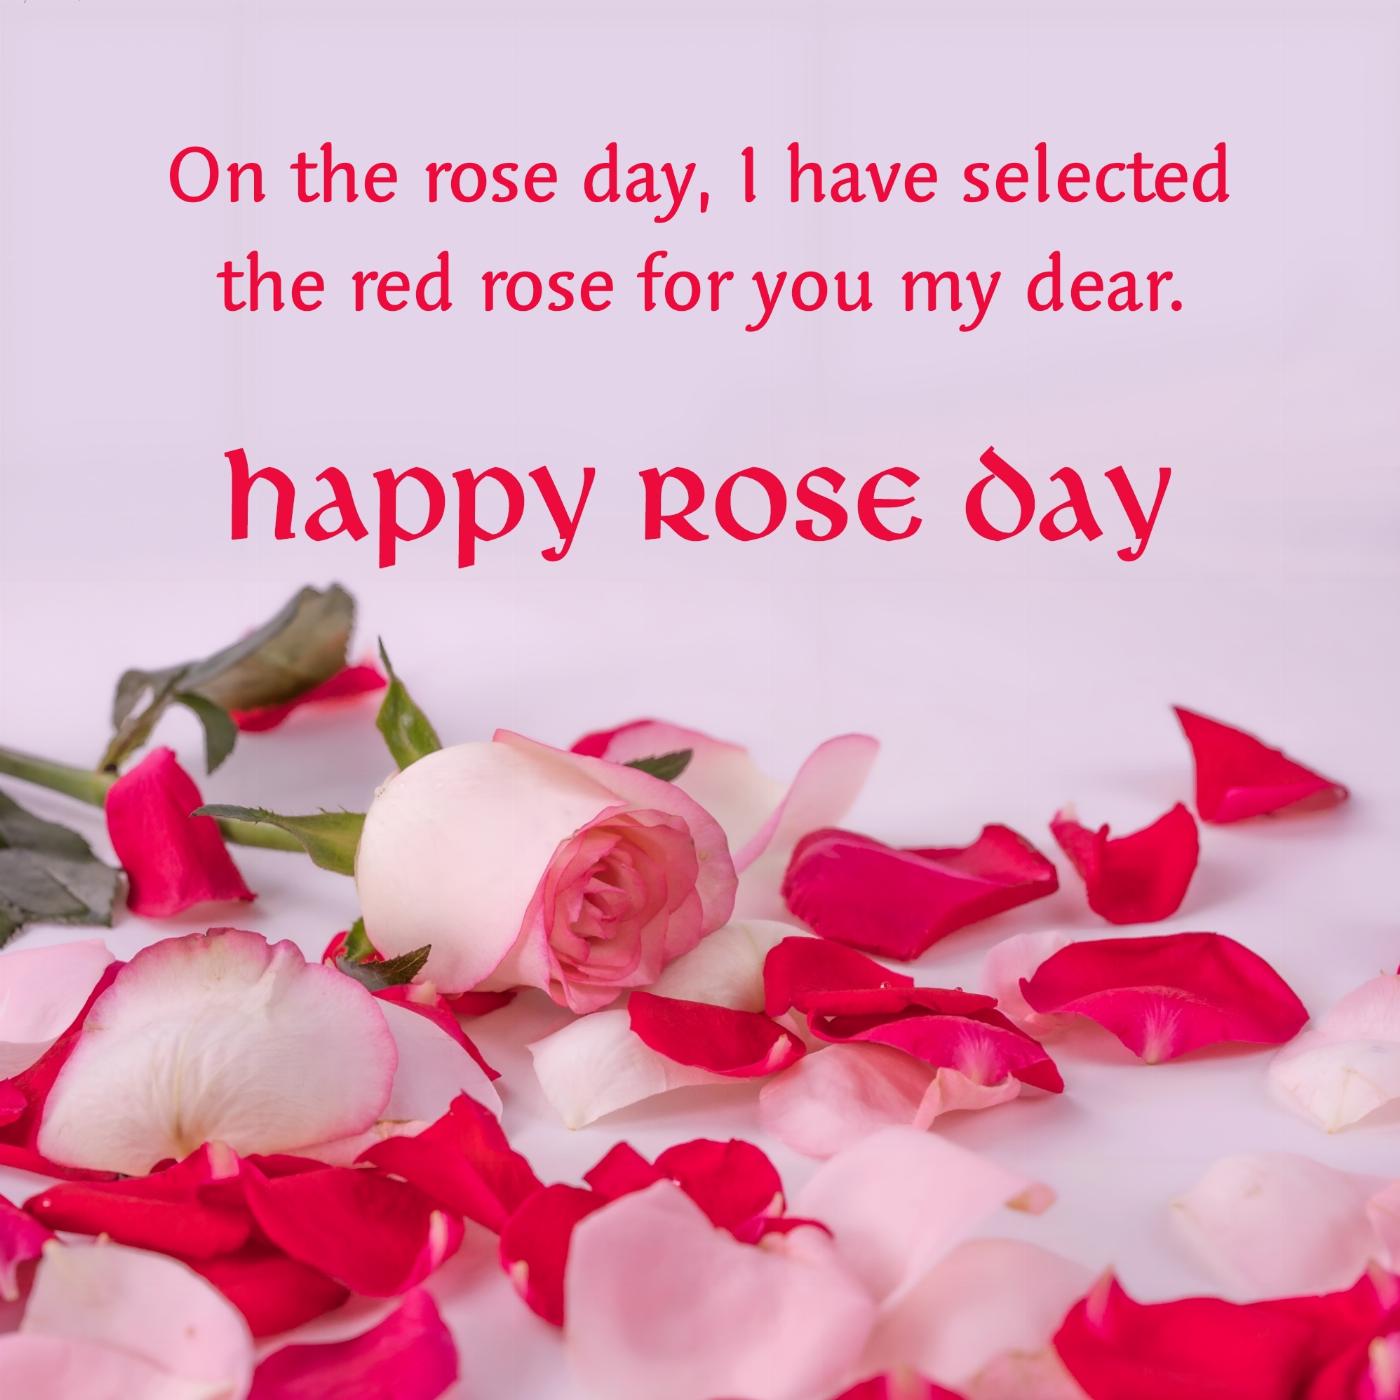 On the rose day I have selected the red rose for you my dear